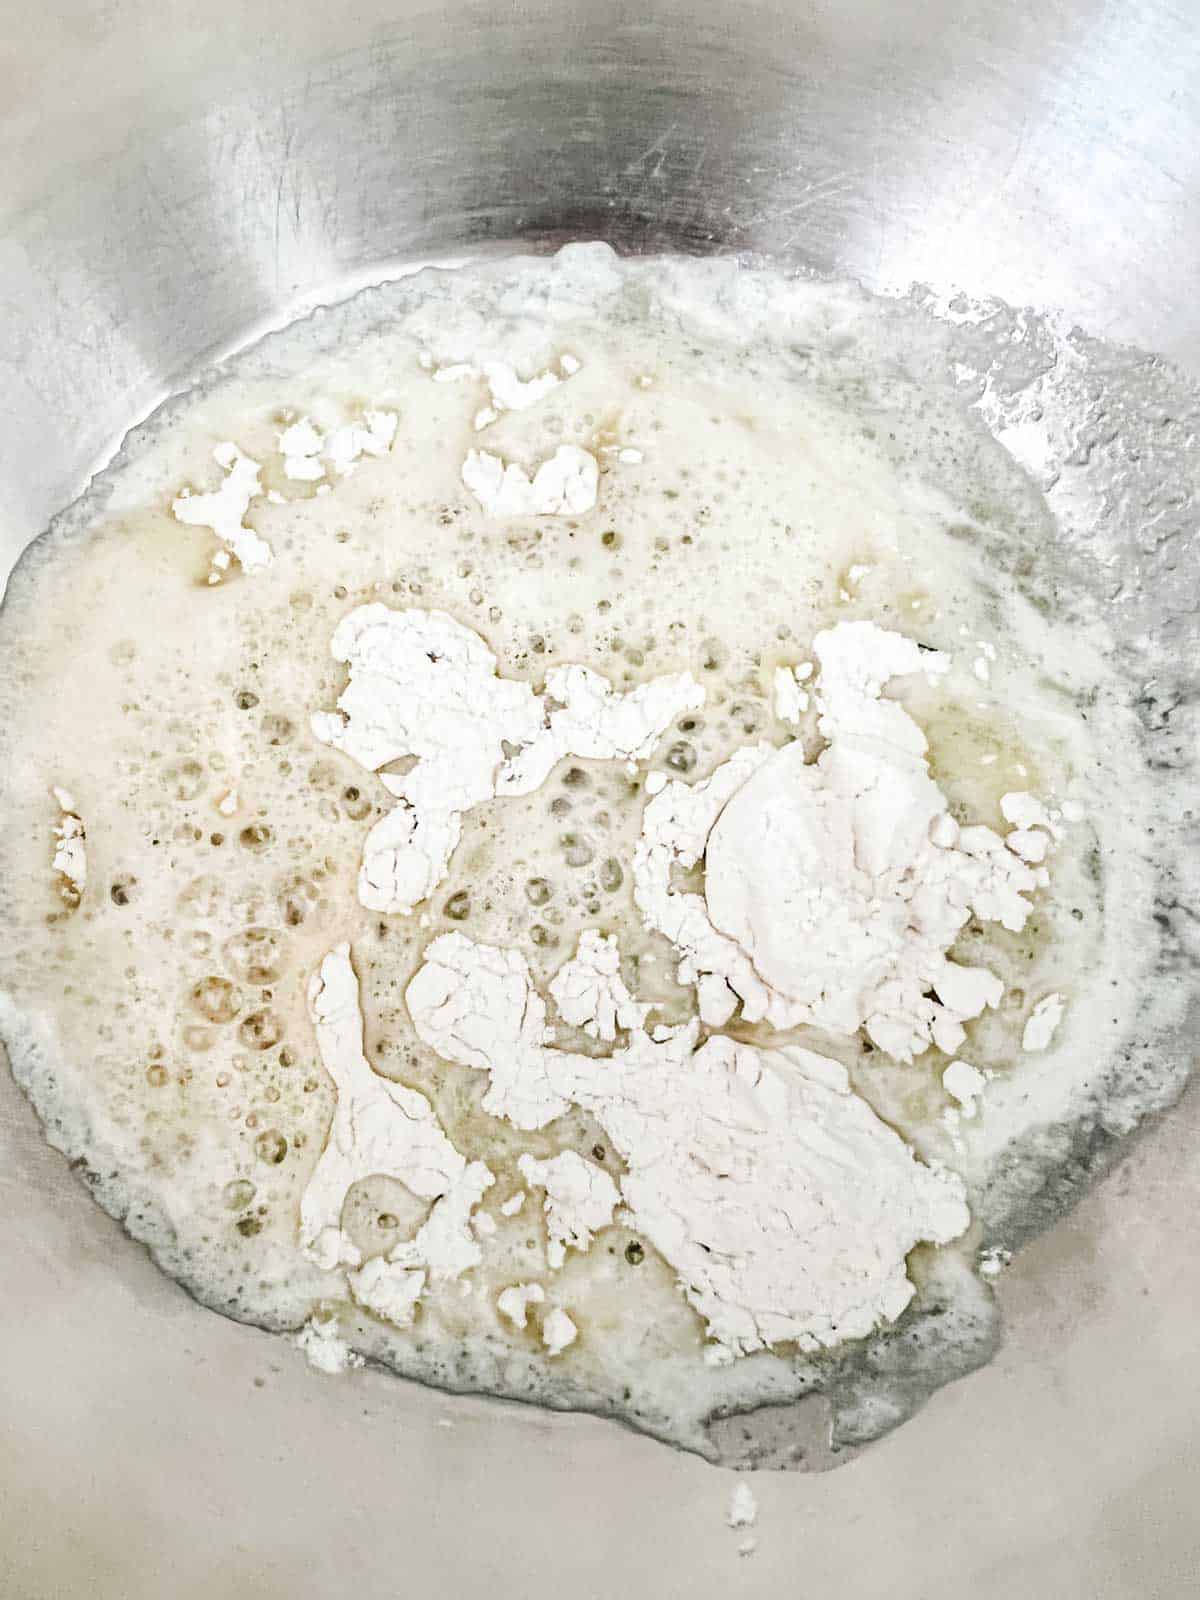 Photo of melted butter that has had flour sprinkled on it in a skillet.